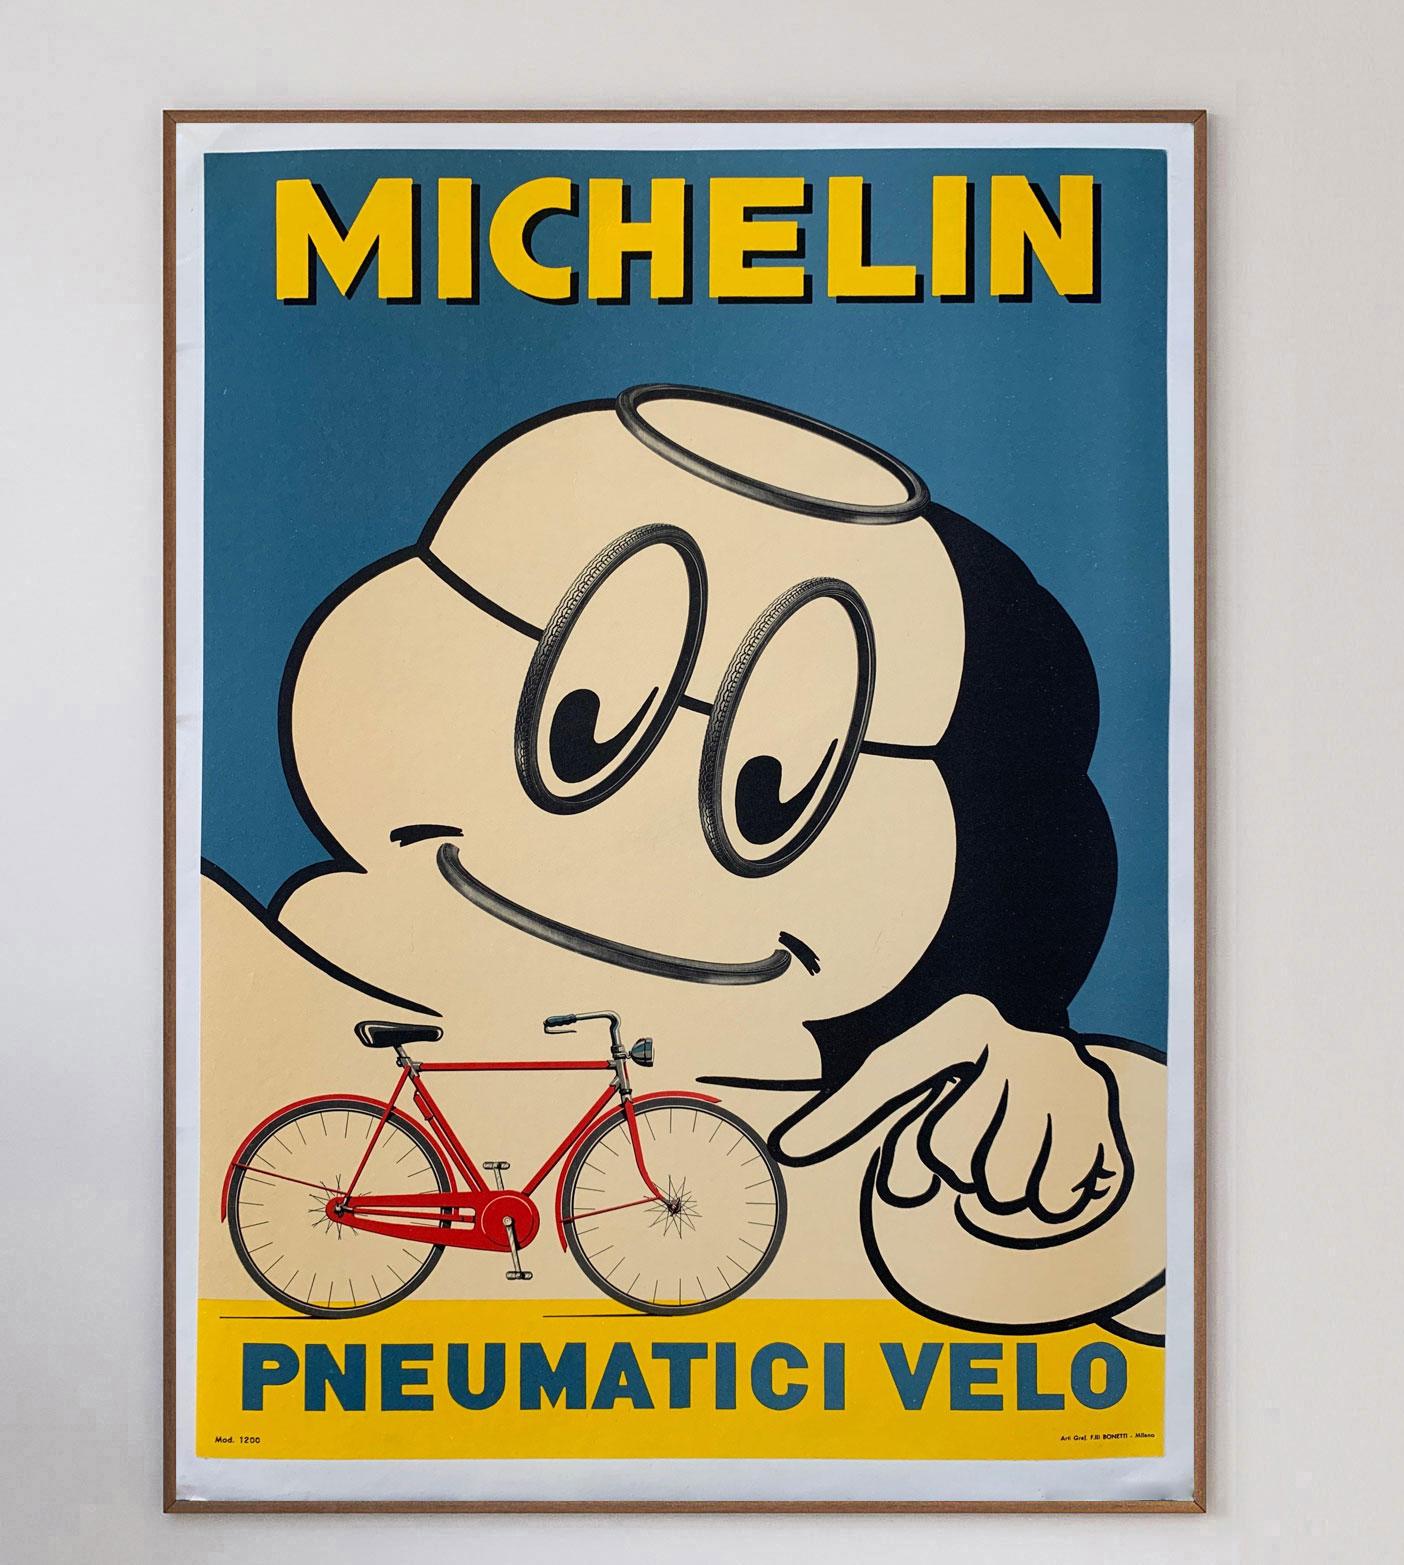 A wonderful poster printed by Verga Printers Milano, this advertisement poster for Michelin tyres was created in 1959 and depicts Michelin mascot Bibendum aka the Michelin Man pushing a bicycle of the era with the text